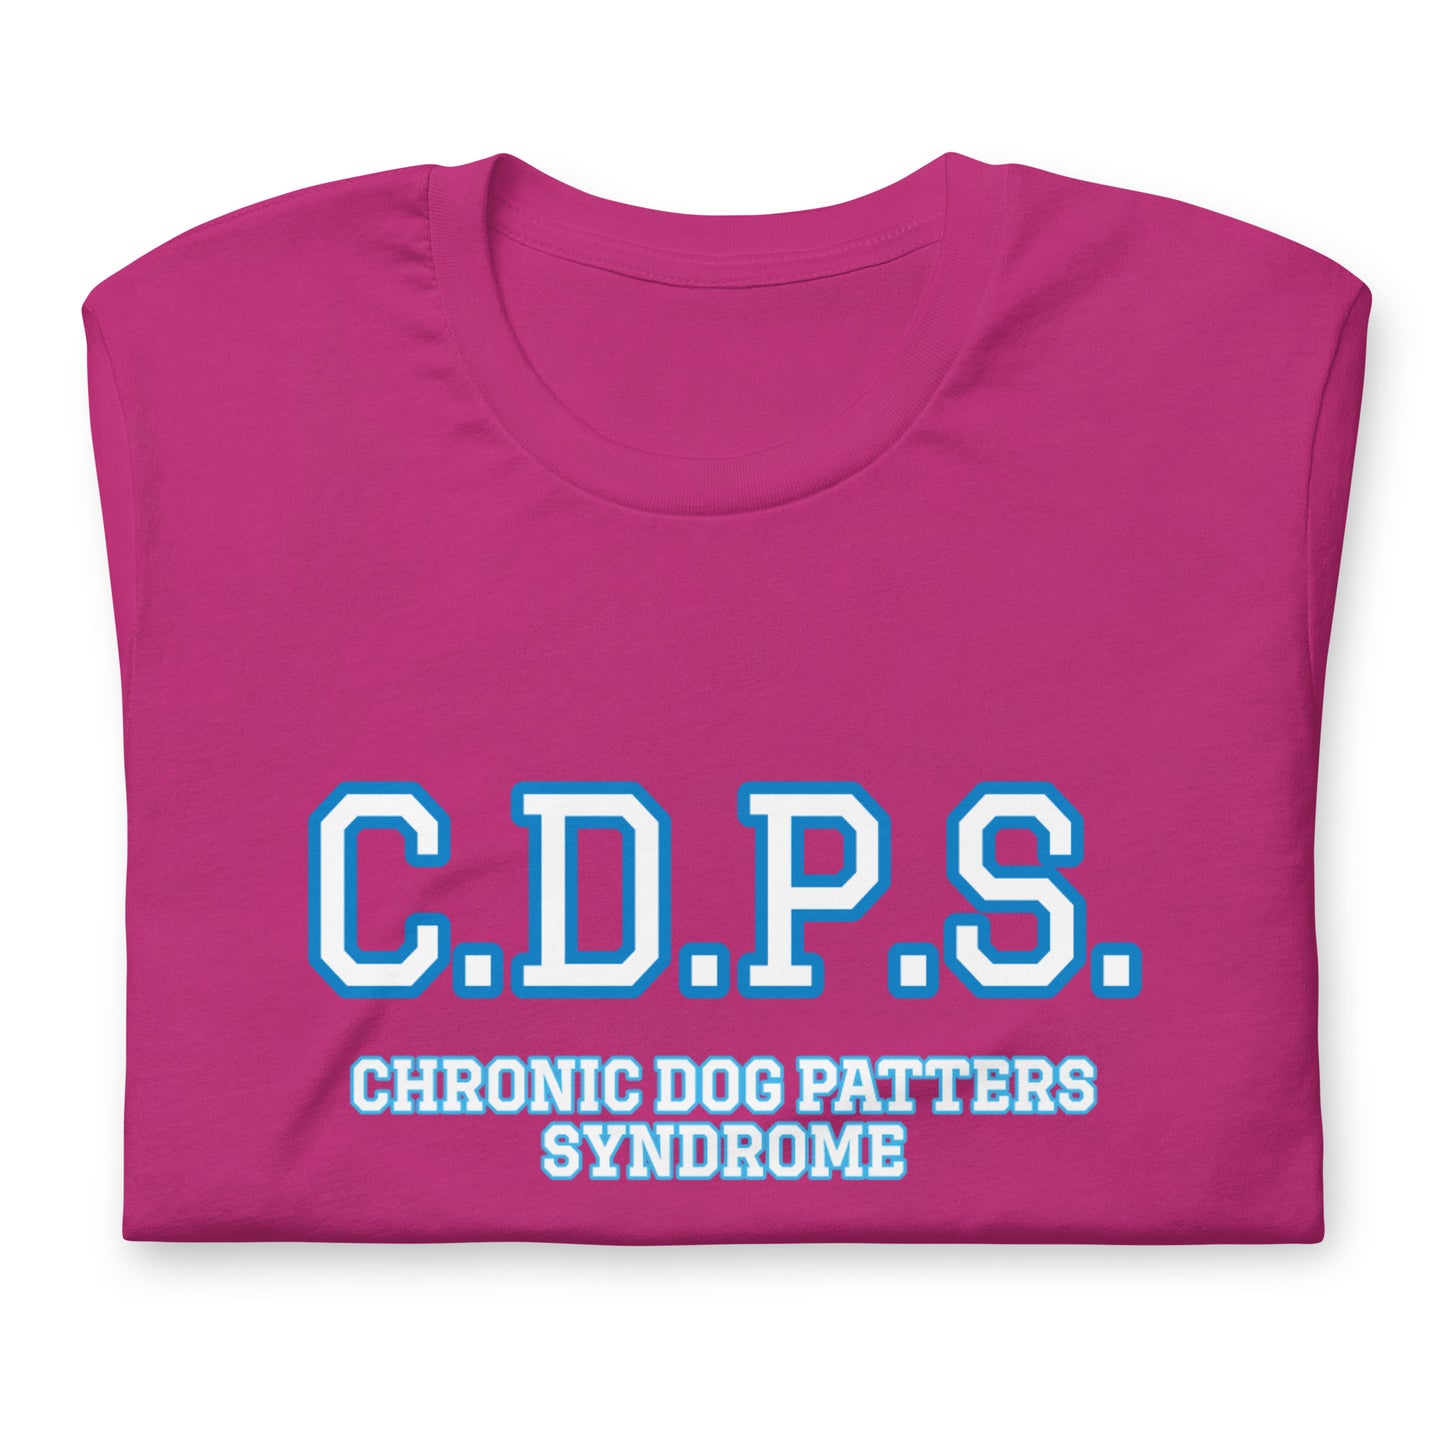 Chronic dog patters syndrome